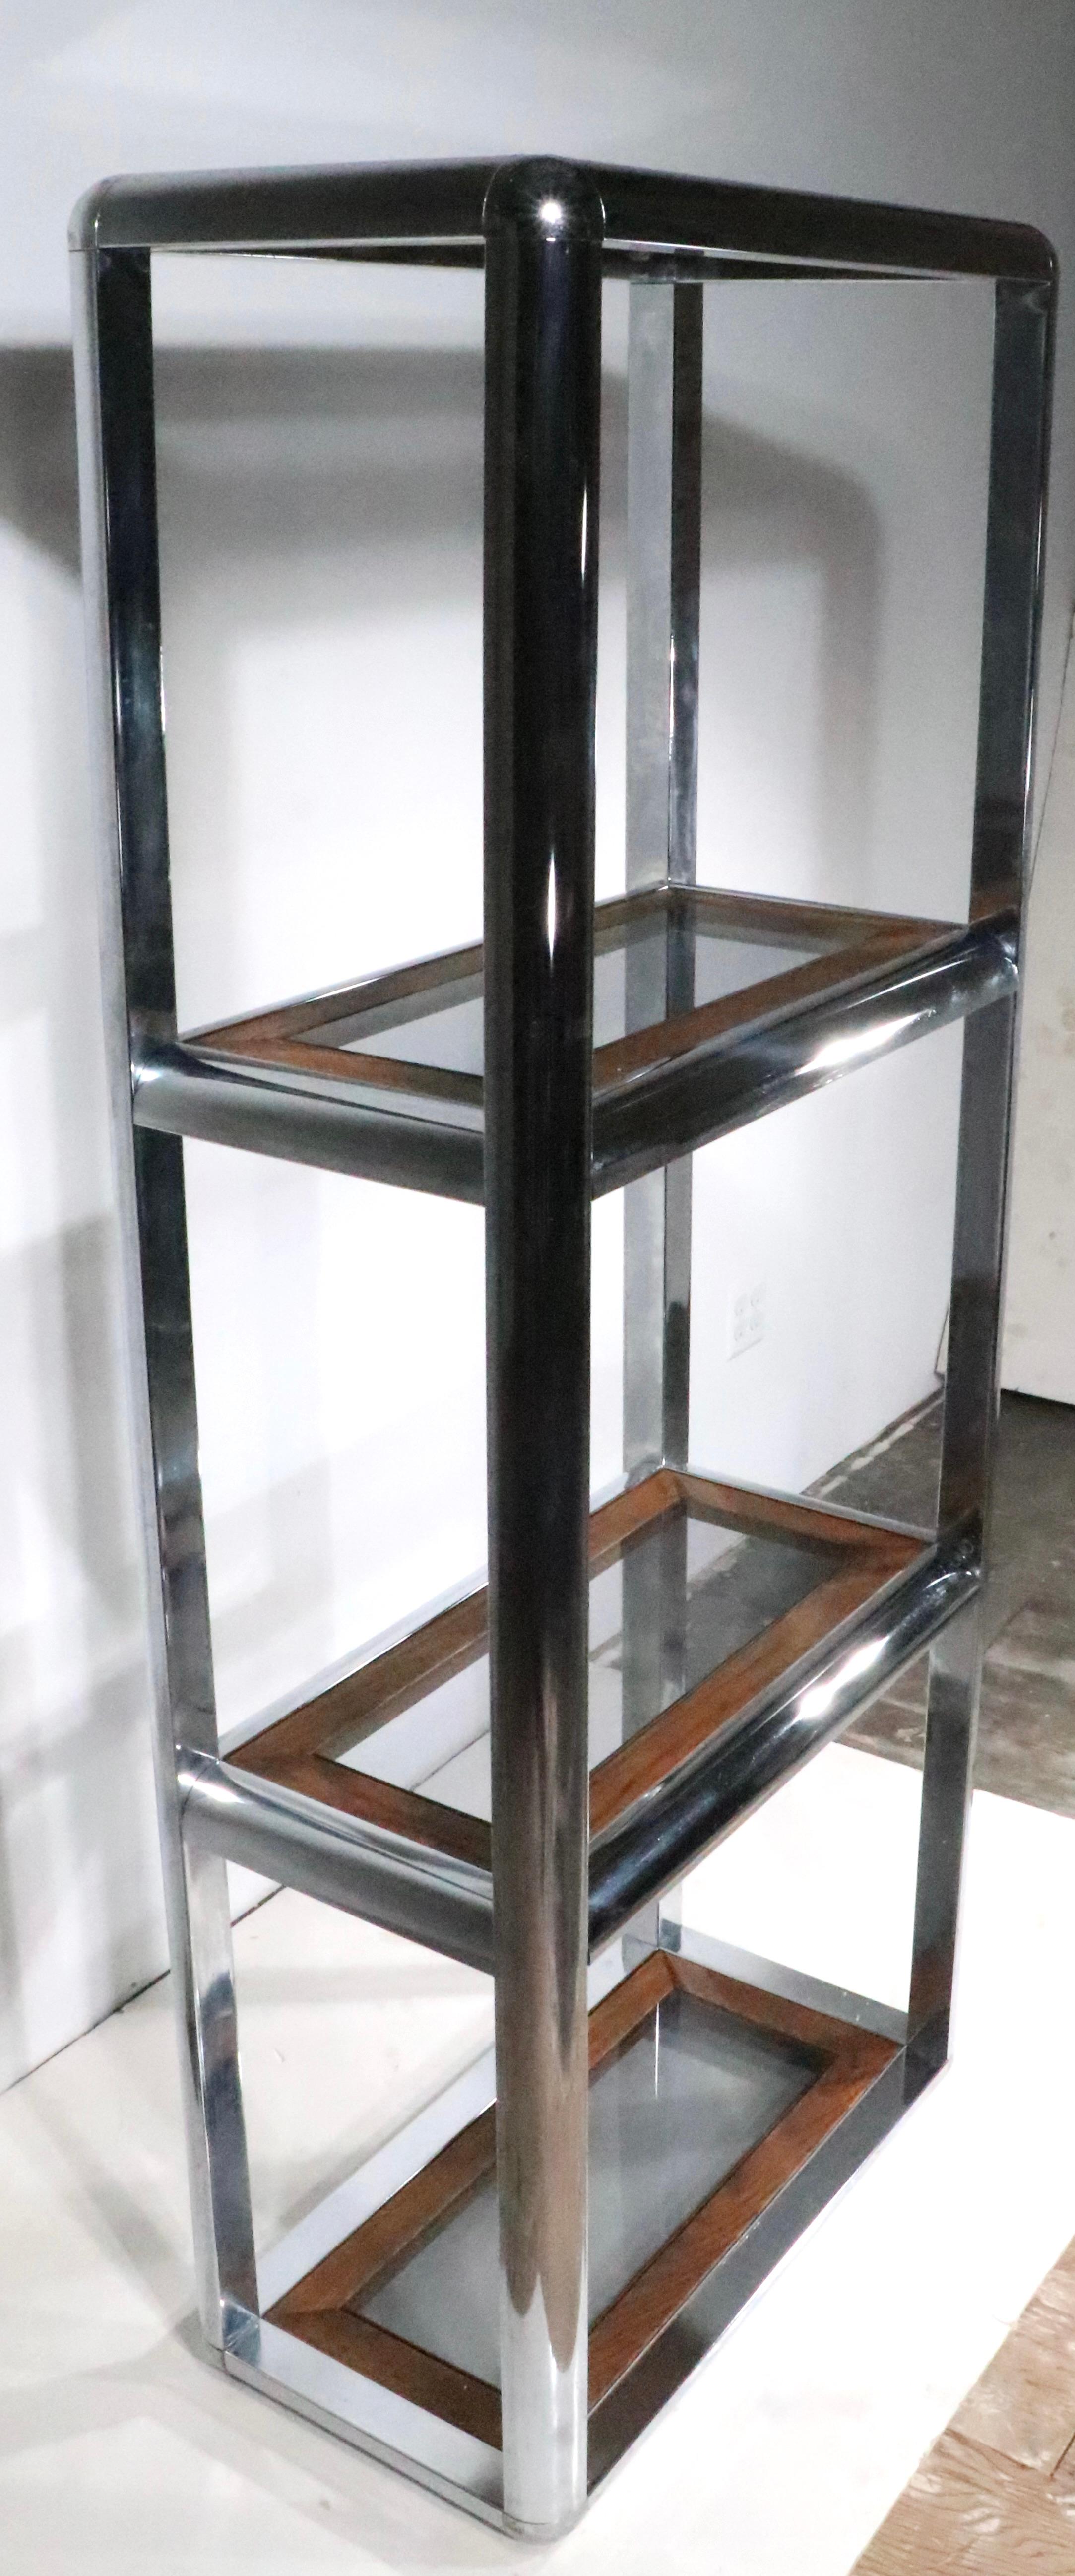 Mid-Century Modern Chrome Glass and Oak Etagere in the style of Baughman c. 1970's  For Sale